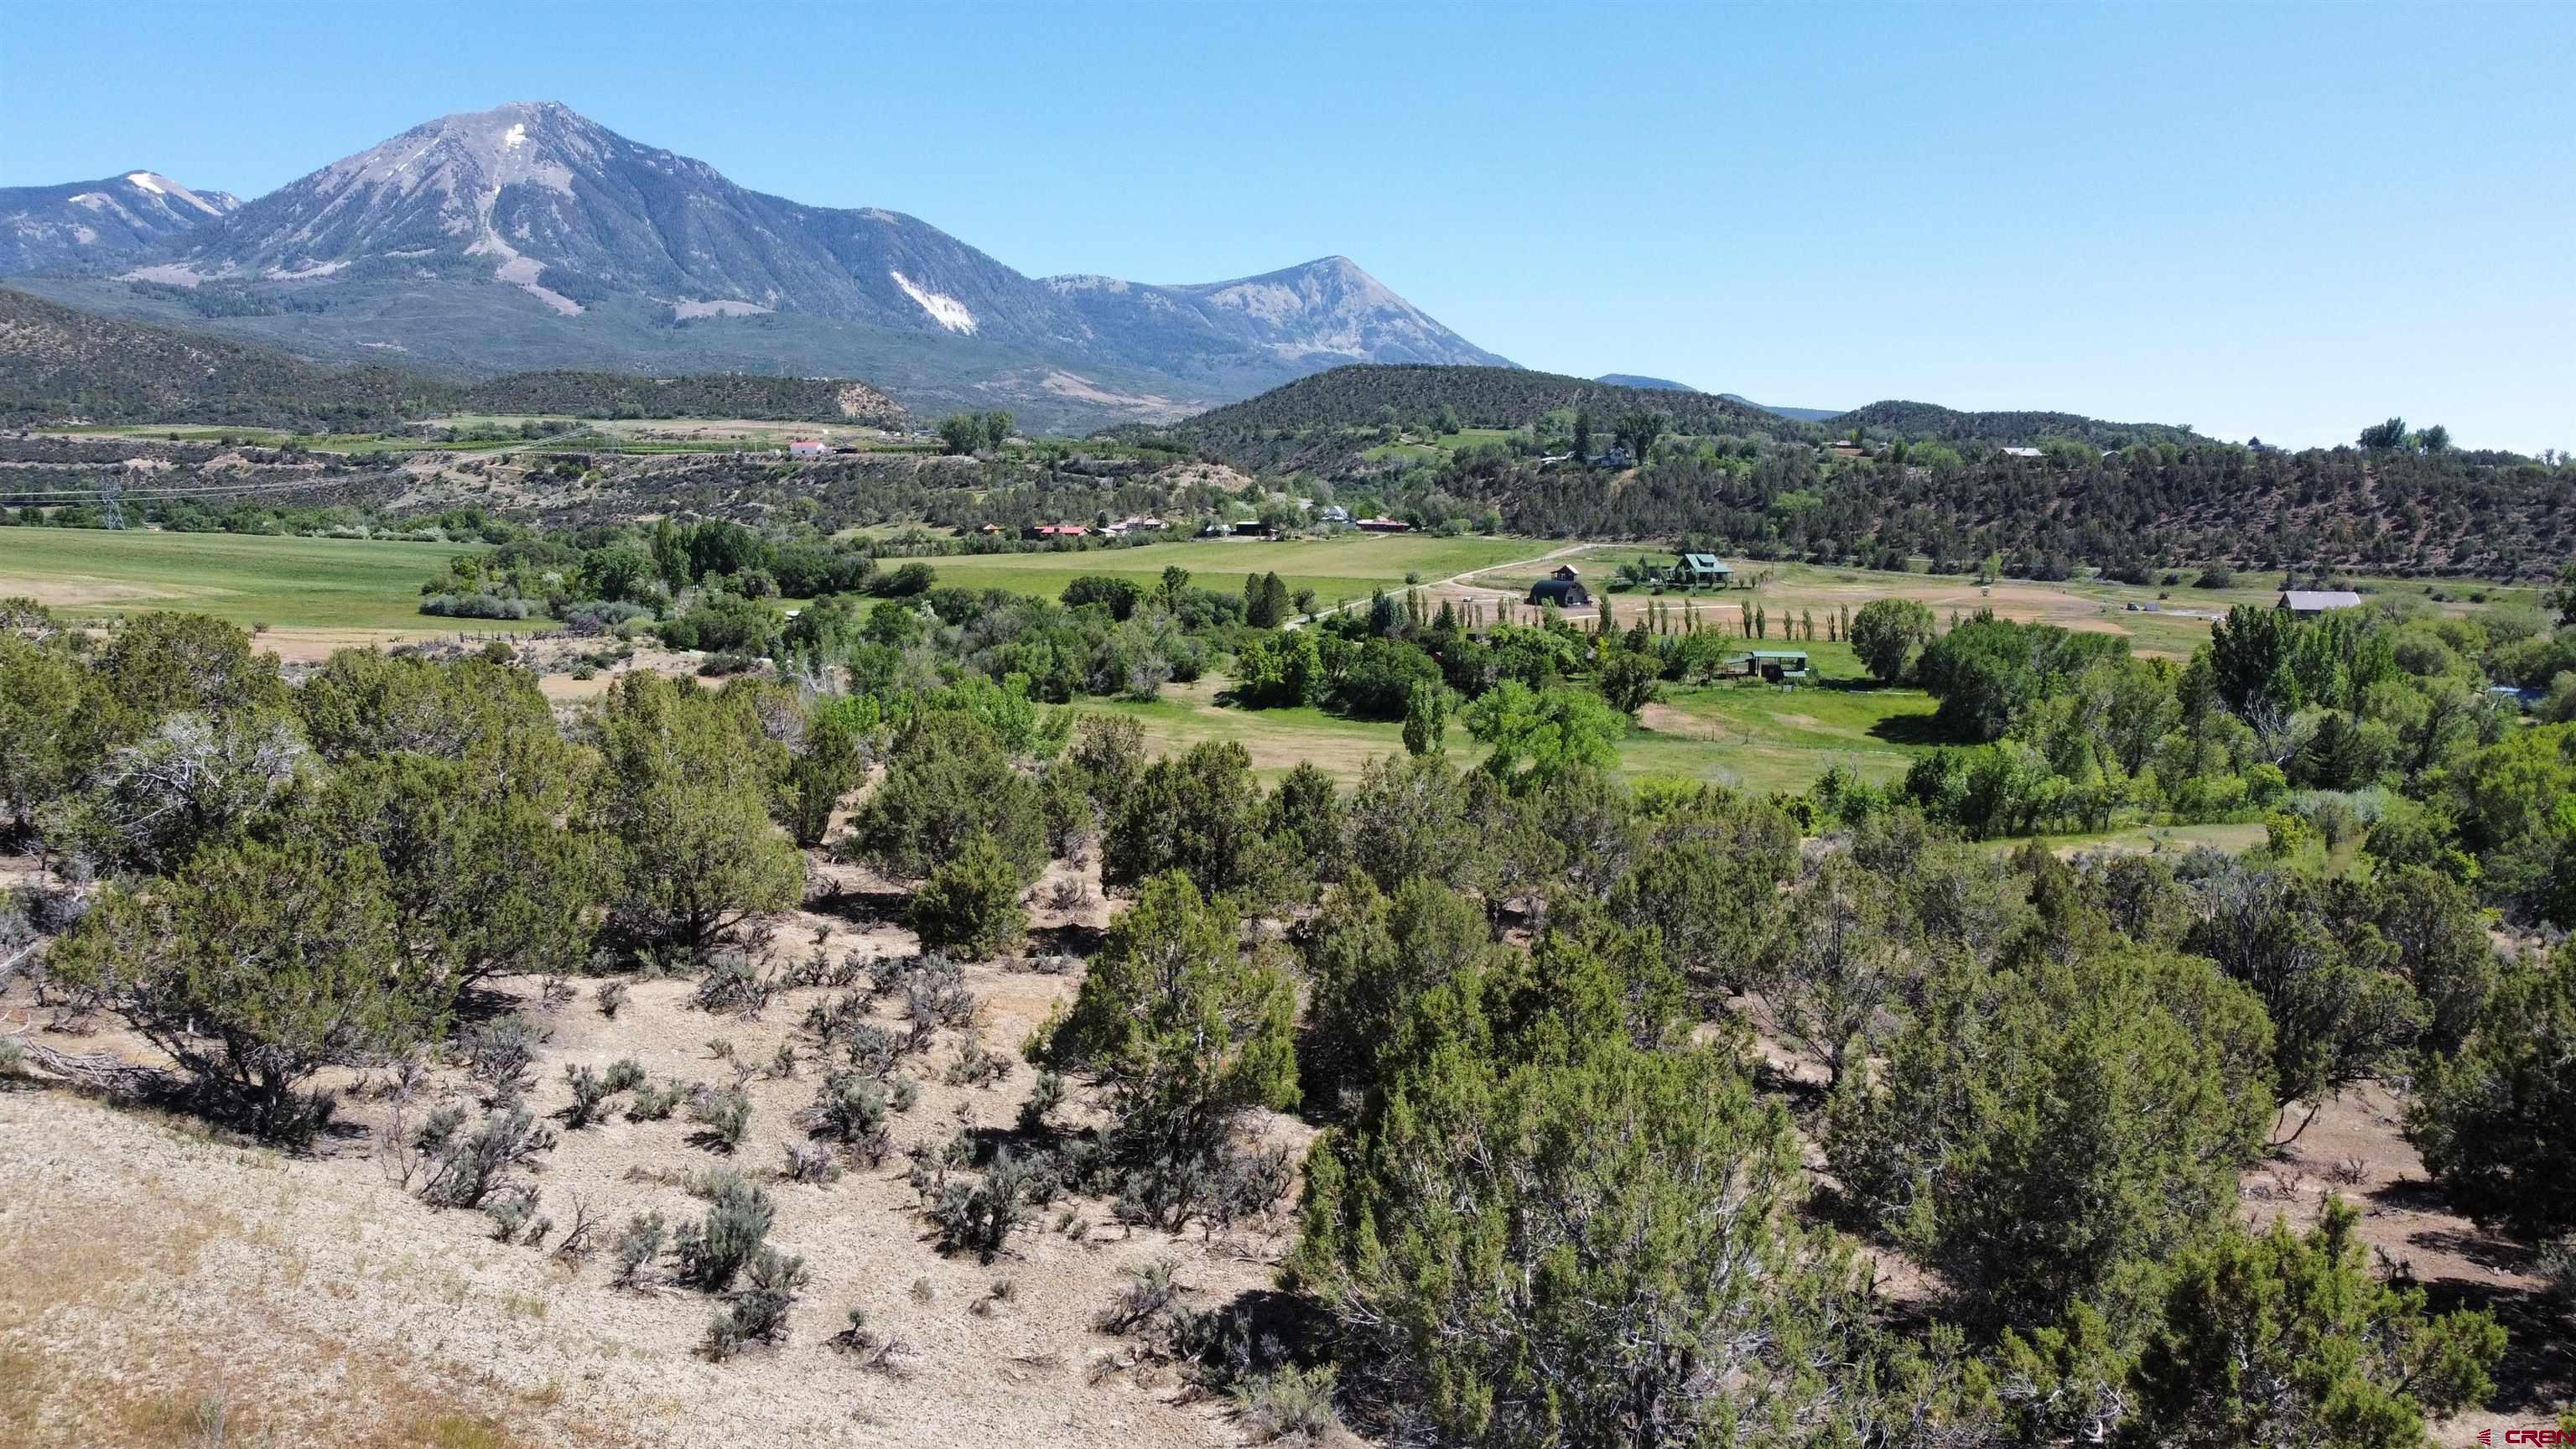 One of a kind parcel on the edge of Paonia! Located adjacent to BLM / Mt. Jumbo trails with full, unobstructed mountain views, this is an exceptional opportunity.  Access is via Hawk's Heaven road but this is outside of the subdivision. Offering senior irrigation rights, a municipal water tap, and room for horses with riding trails right out the gate. End-of-the-lane privacy,  the parcel is part of a conservation easement limiting building to within a three acre envelope with few other restrictions.